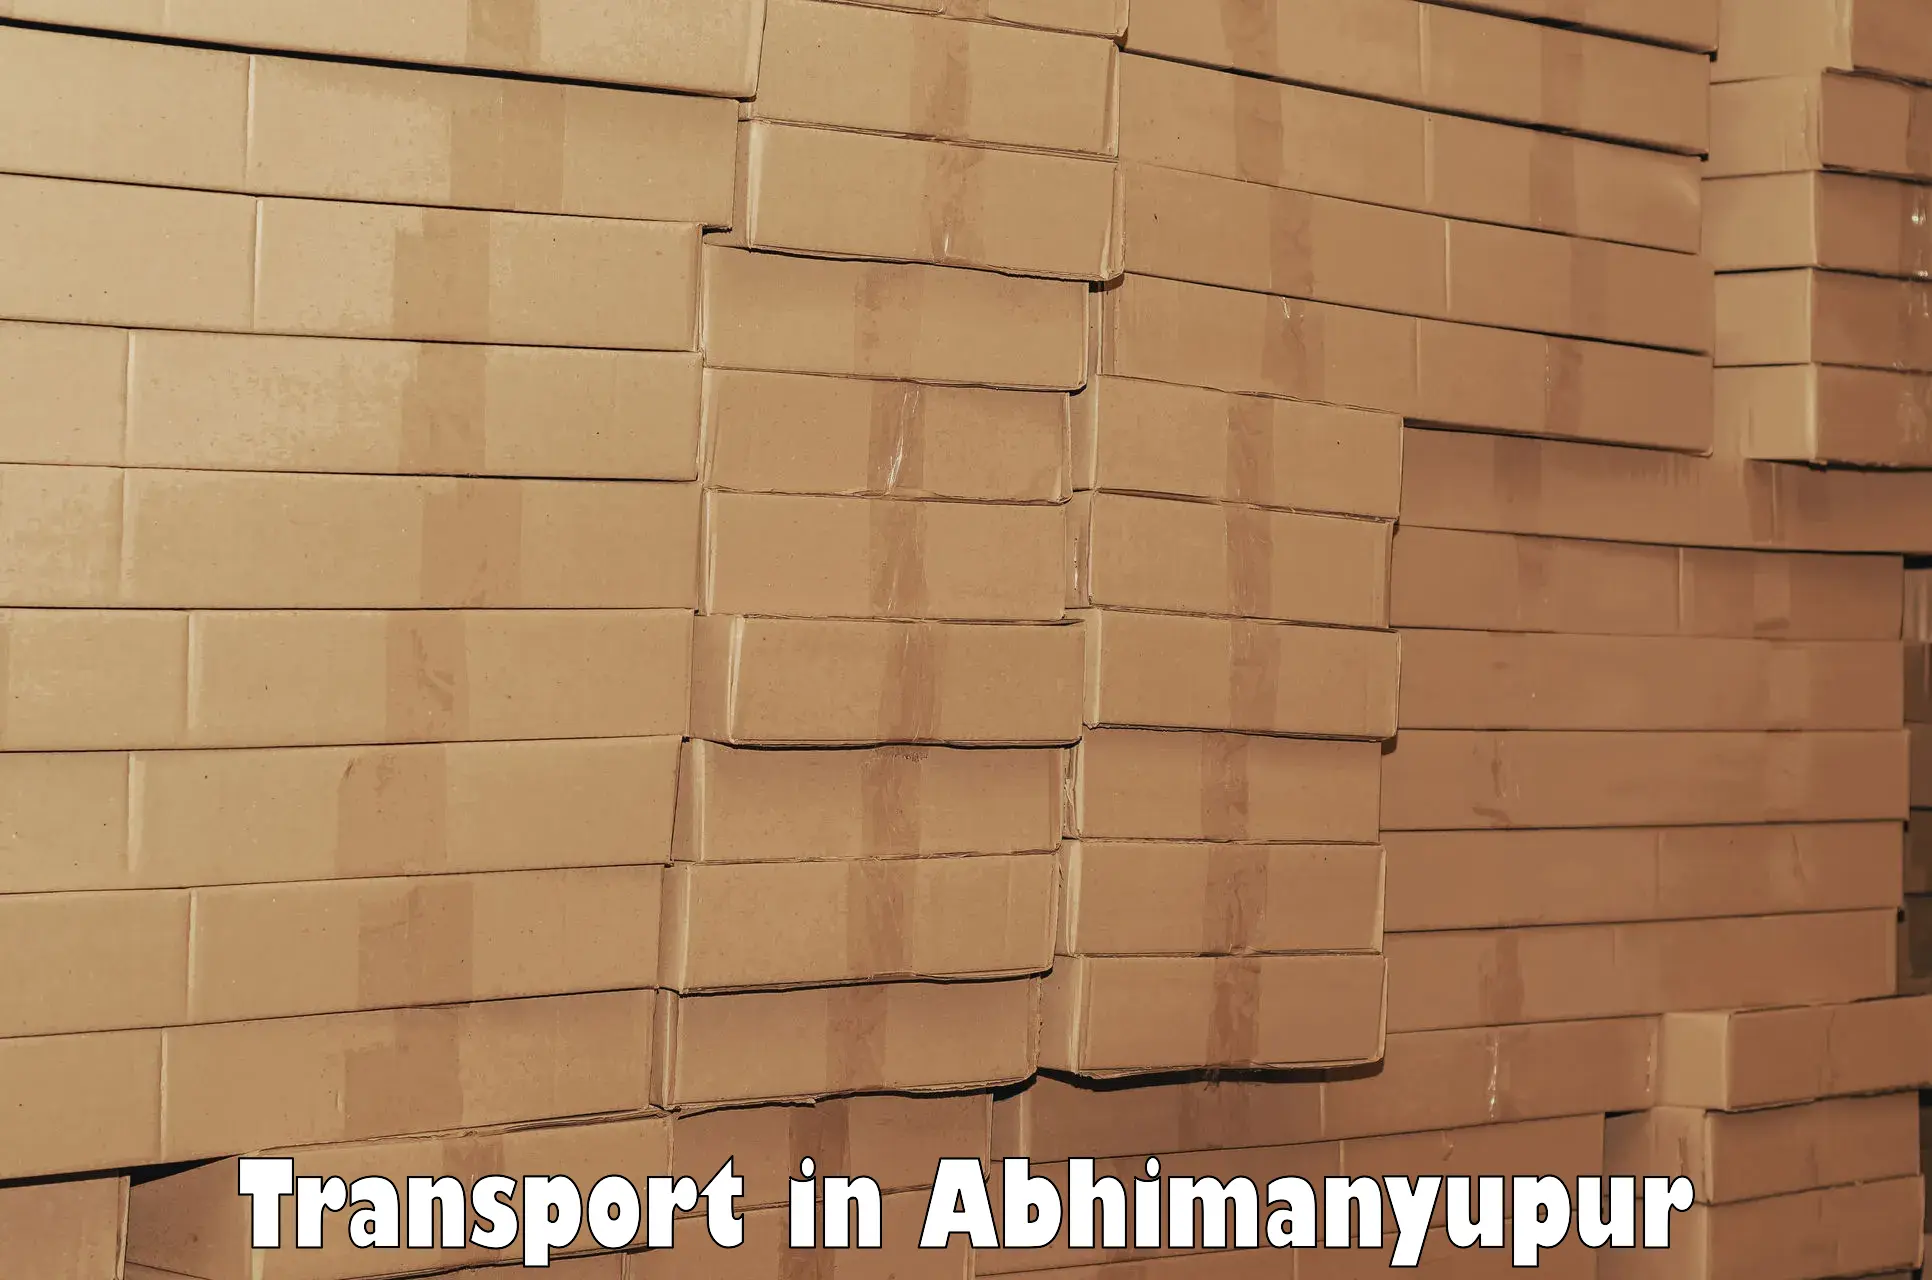 Daily transport service in Abhimanyupur